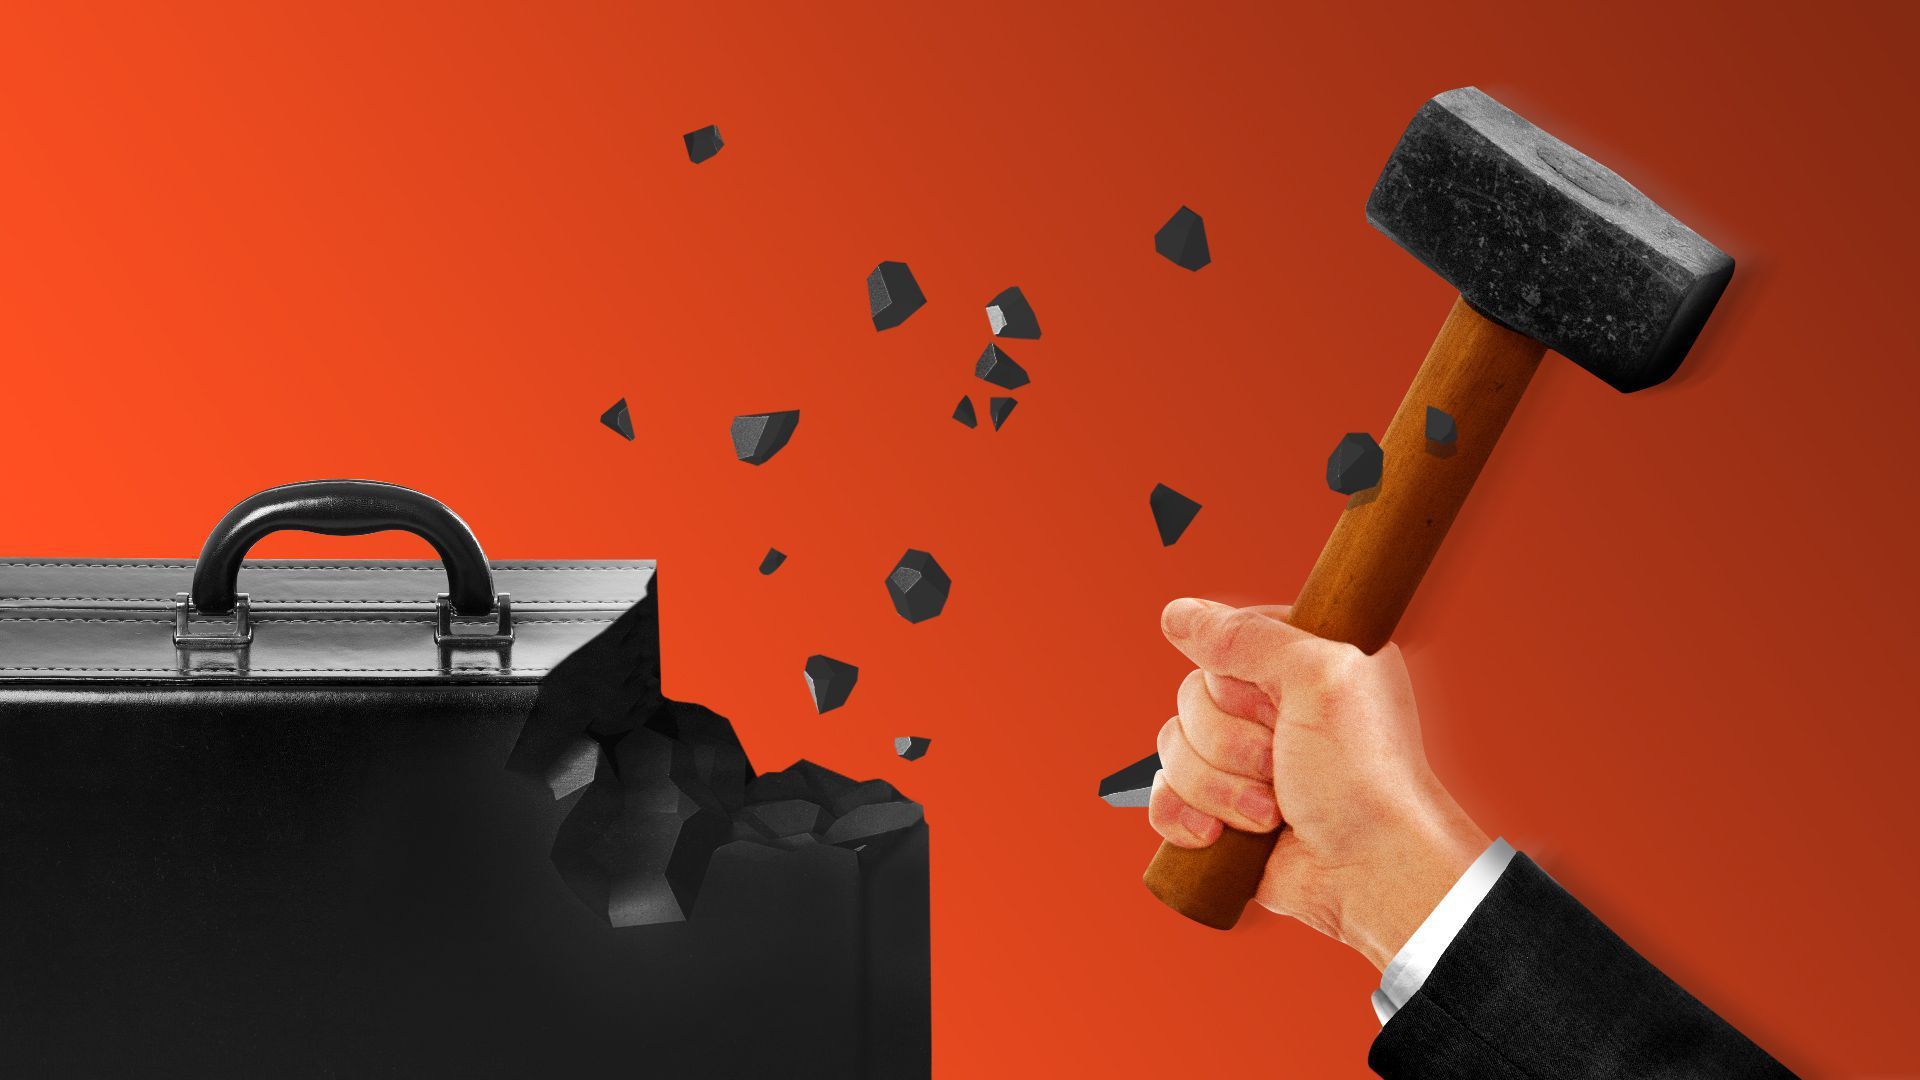 An illustration of a hammer chiseling away at a suitcase